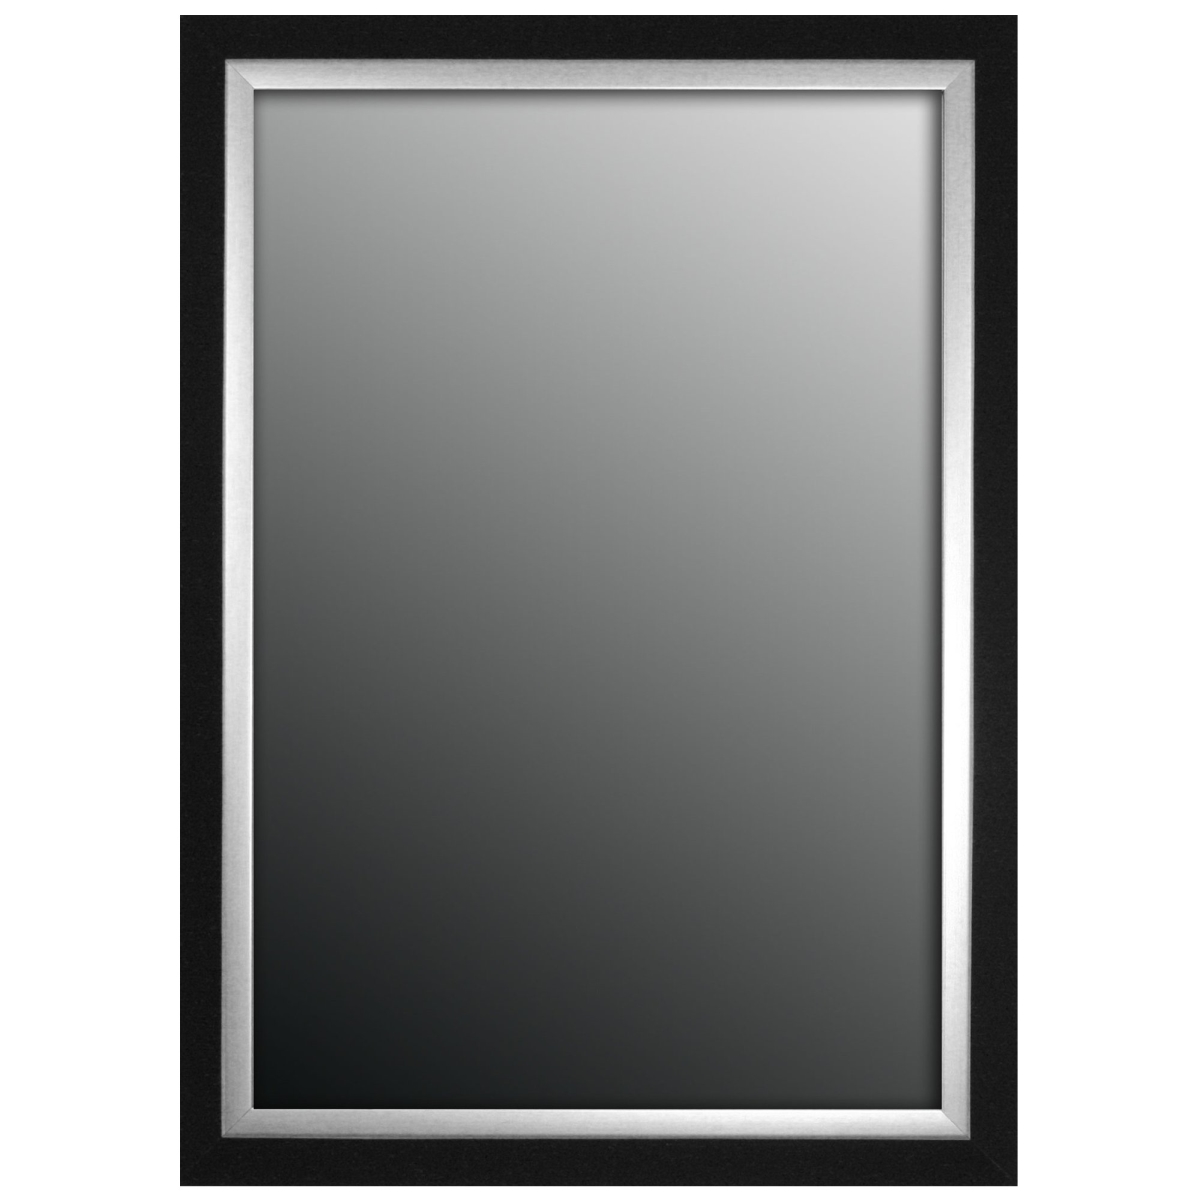 Hitchcock Butterfield 807501 Black & Brushed Nickel Silver Montevideo Natural Wall Mirror - 22.75 X 58.75 In.